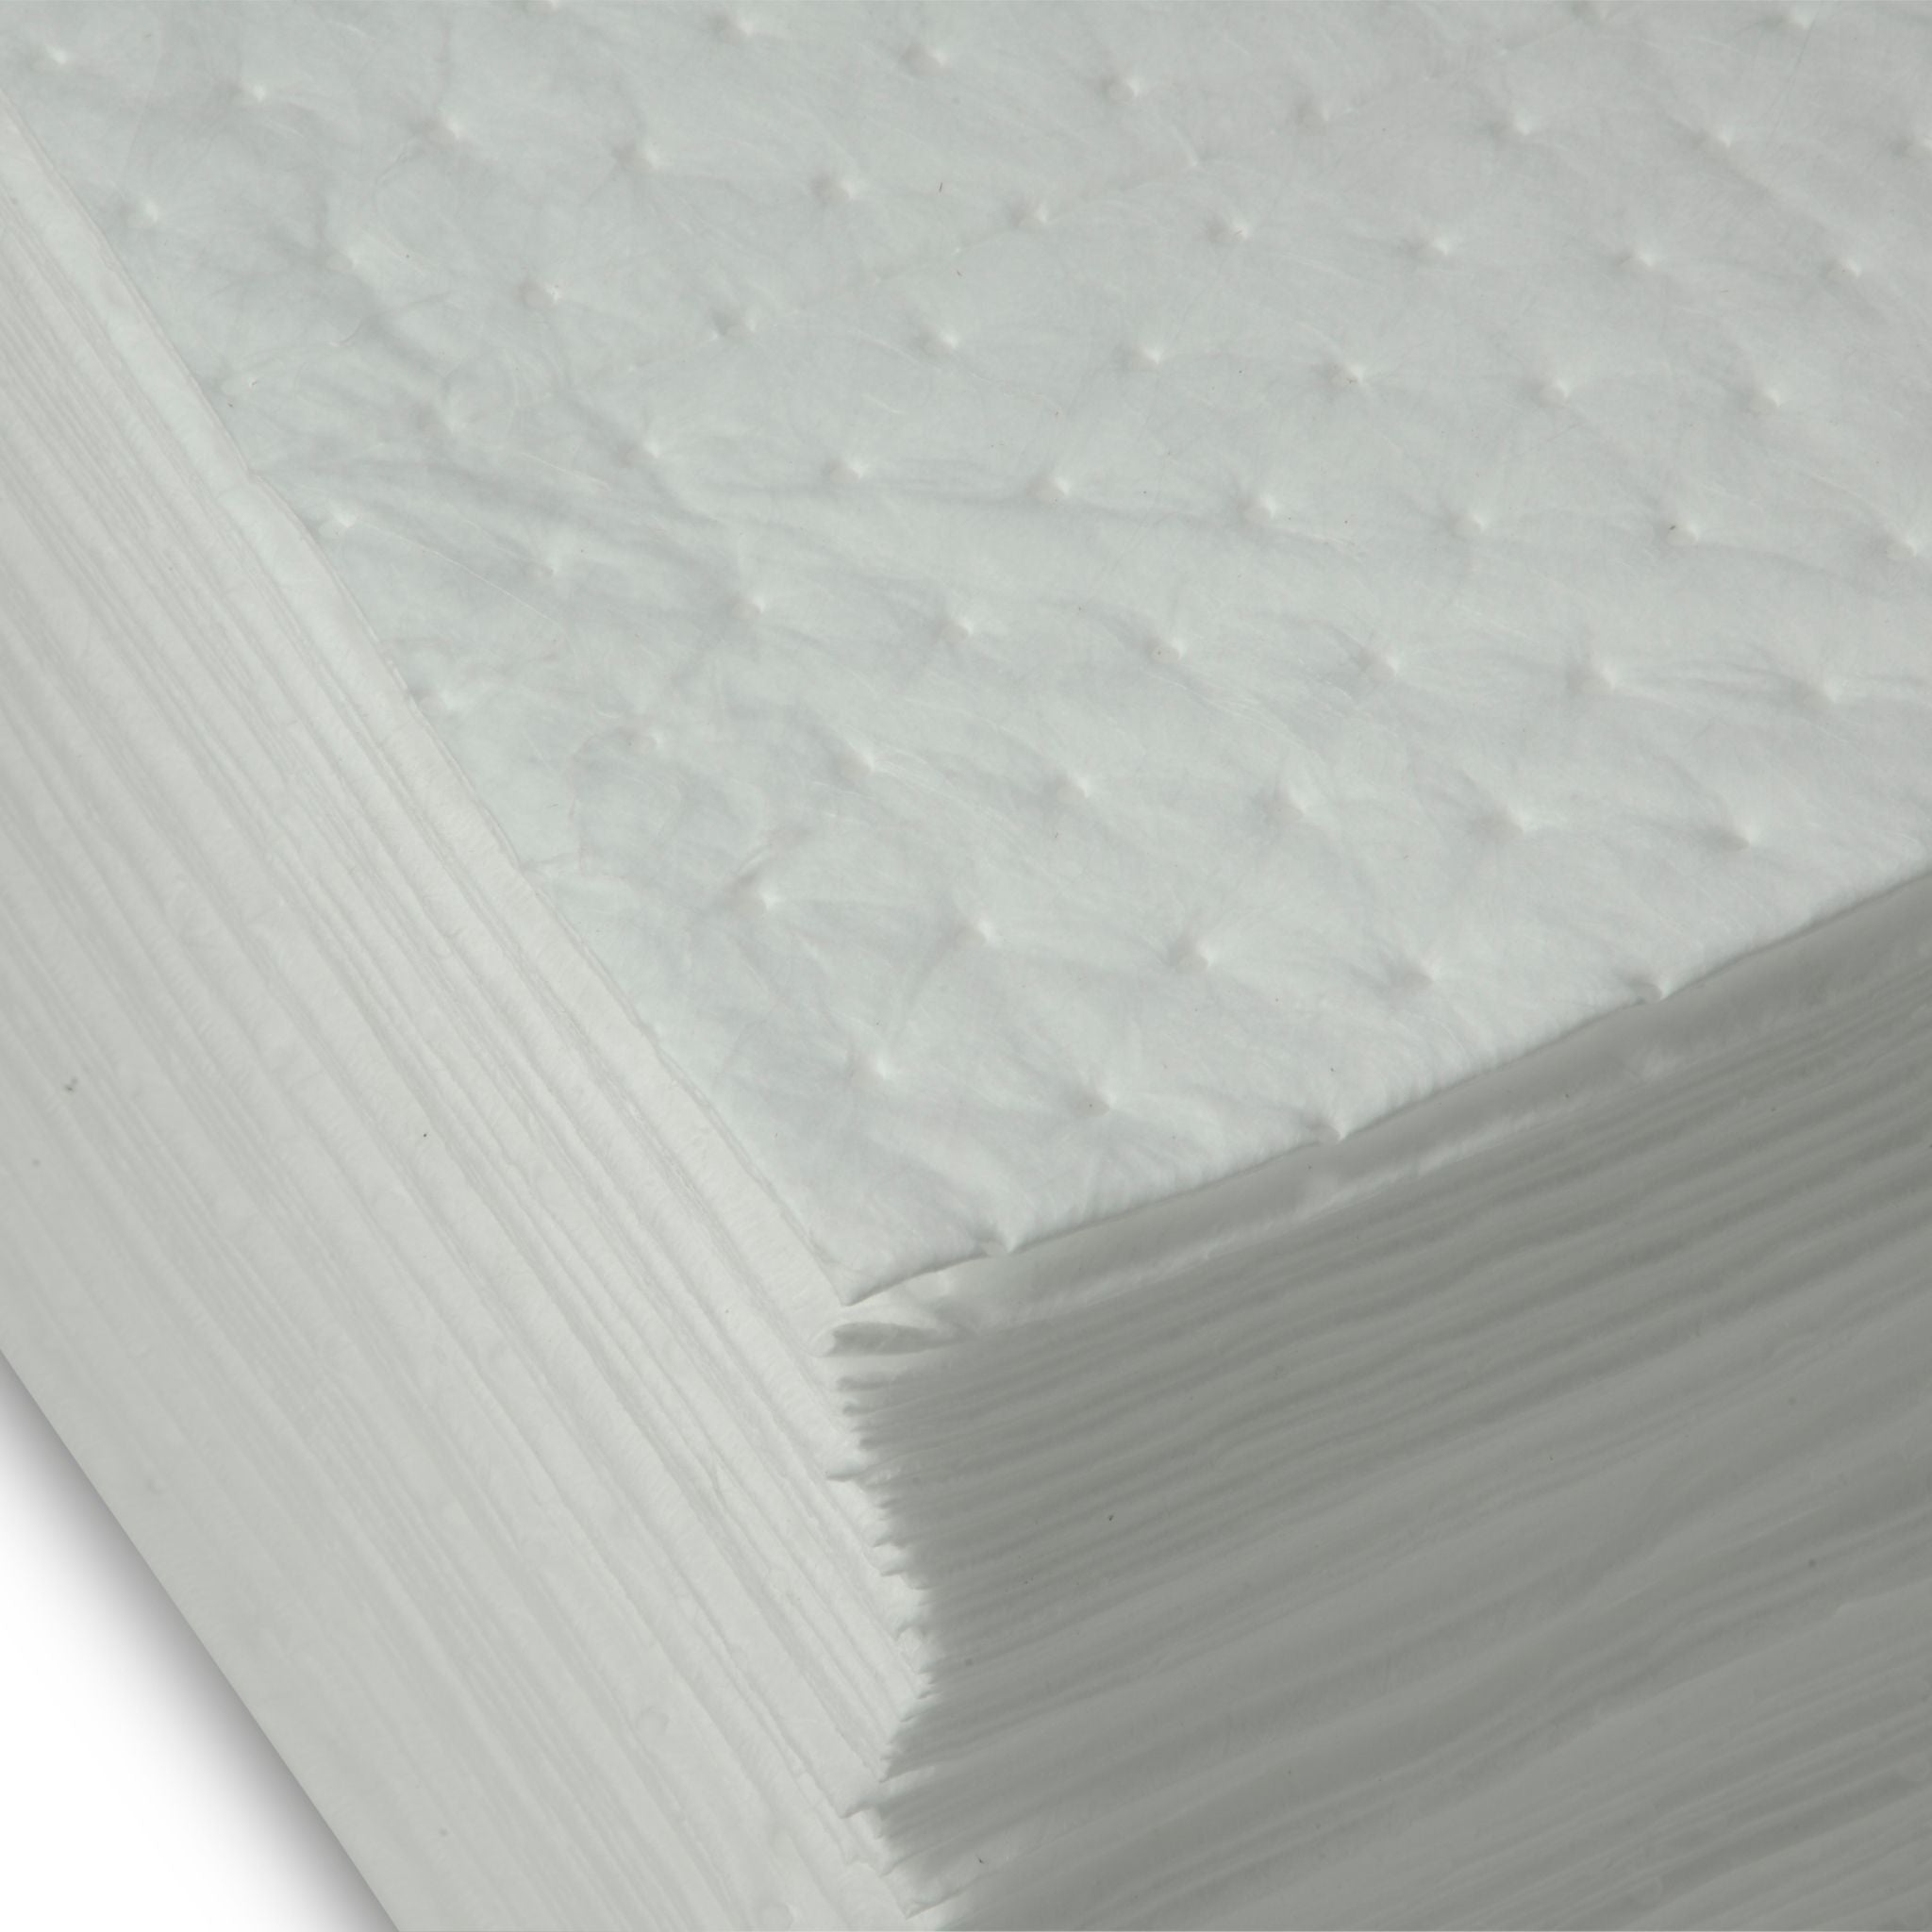 AABACO Oil ONLY White Absorbent Pads - Dimpled HEAVY Weight Pads – 15”x 18” (100/bale)